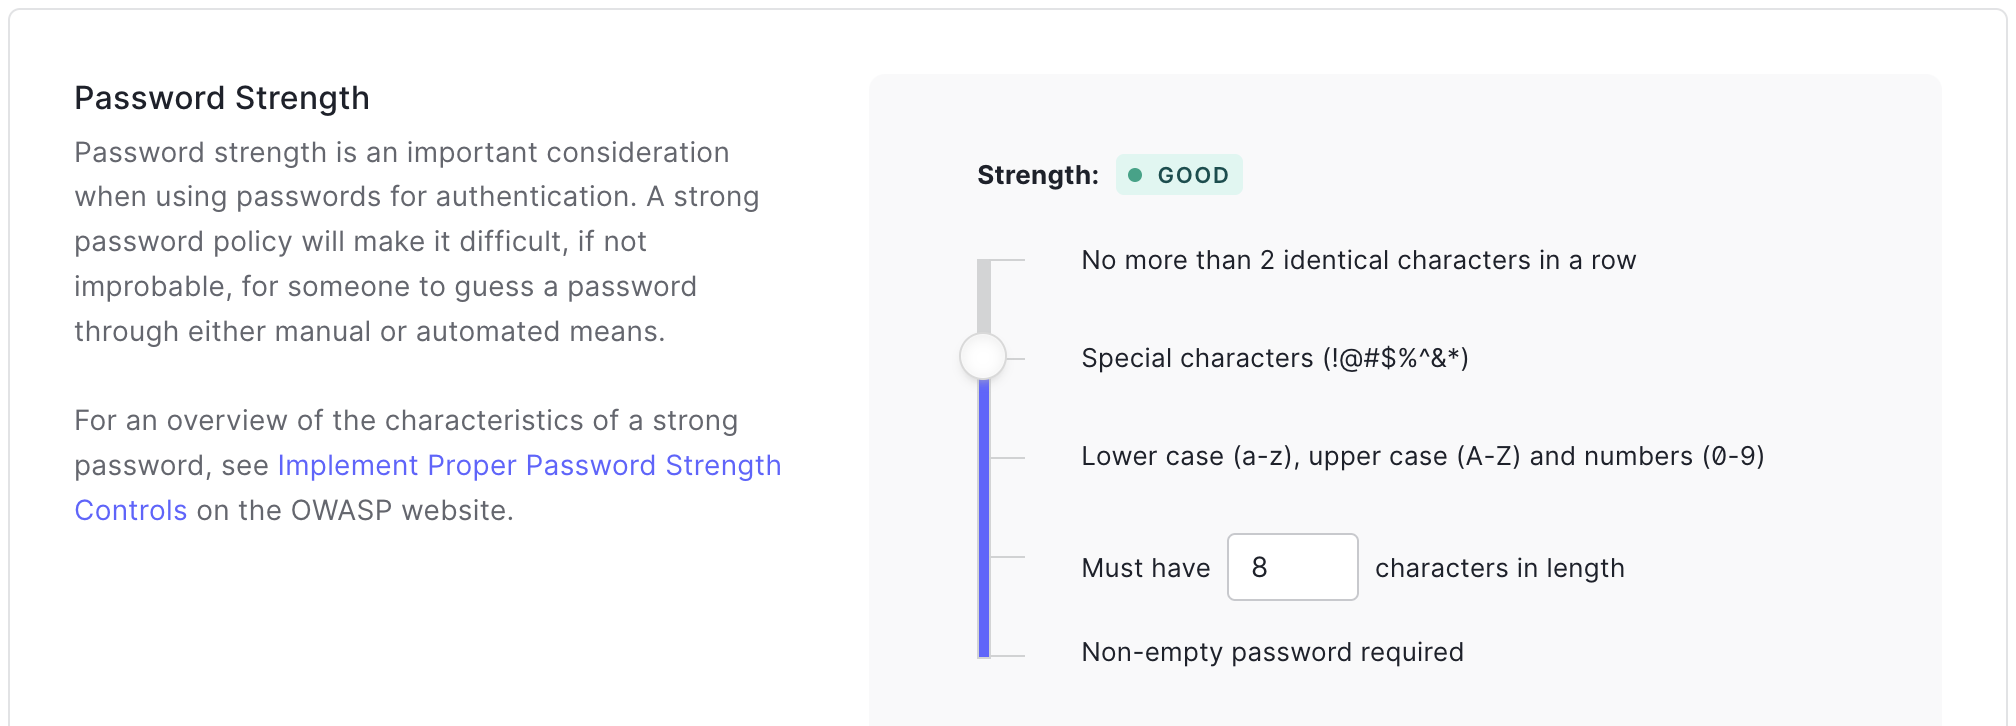 Auth0 provides an easy to use interface to set up your password policy